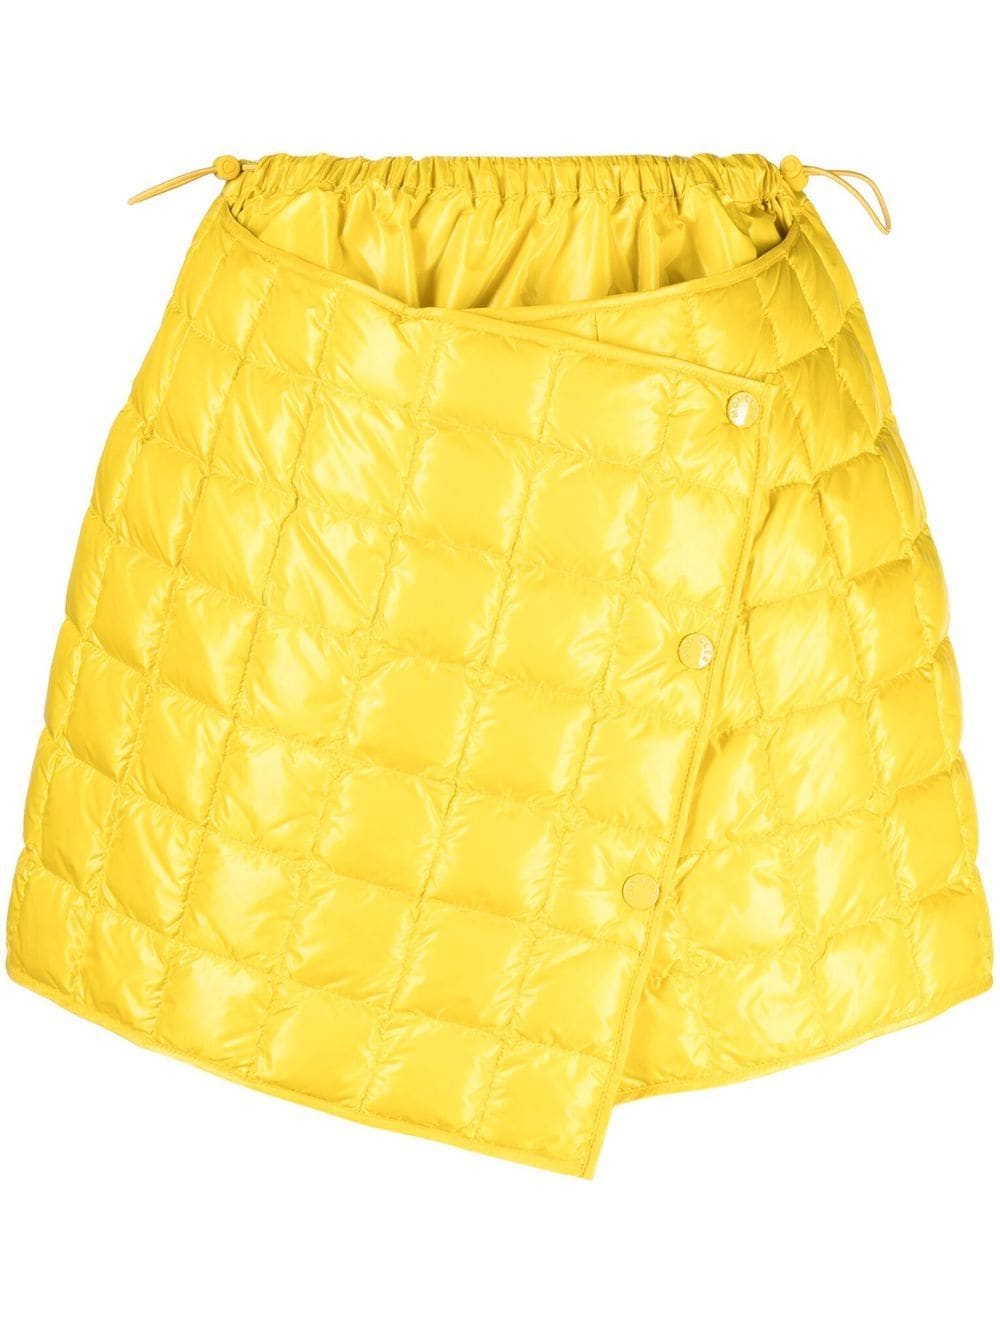 Moncler Yellow Quilted Finish Asymmetric Skirt von Moncler